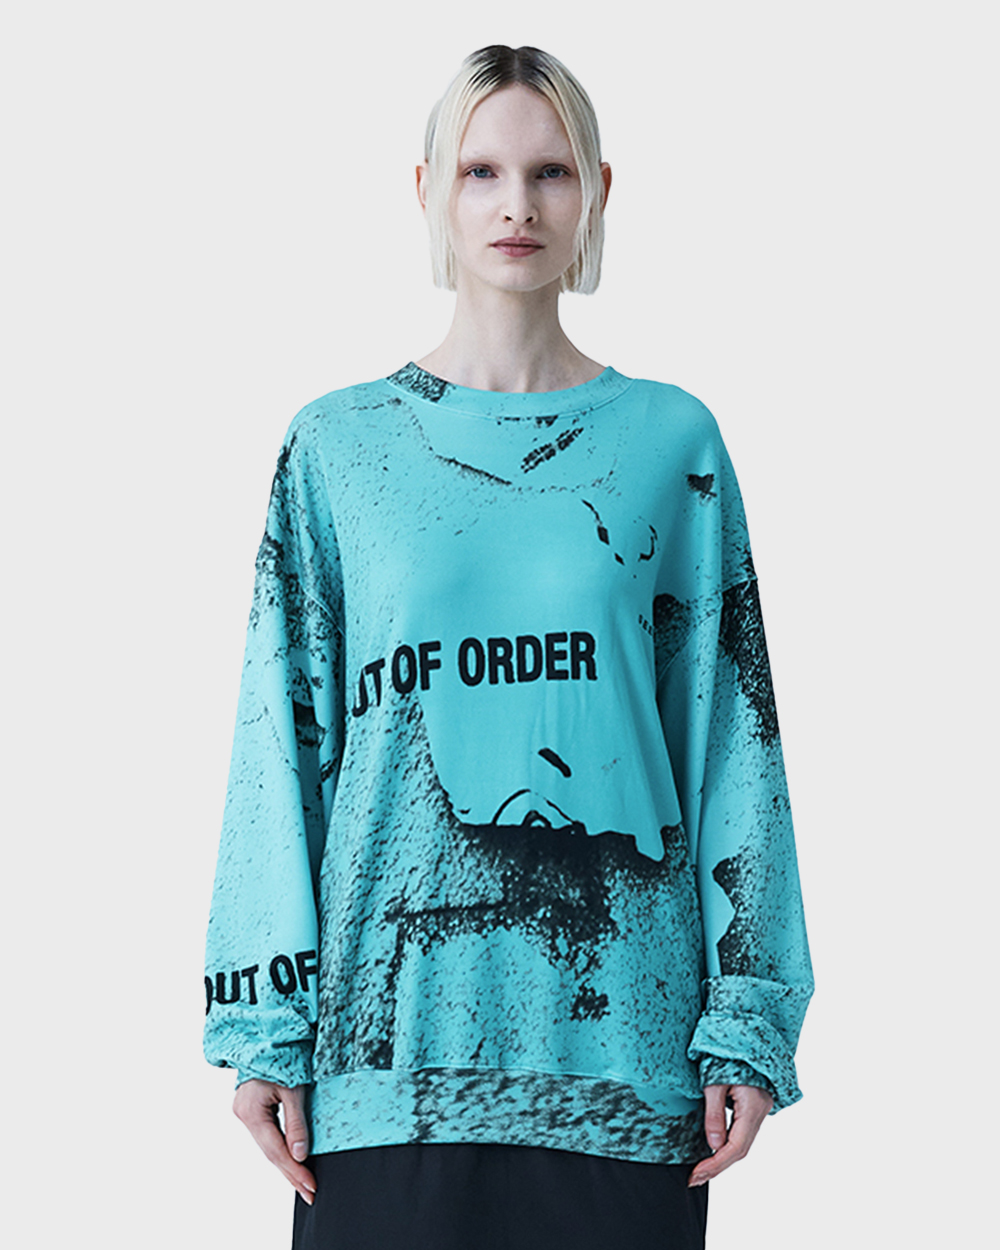 SEEN Out of order knit sweatshirts (Emerald green)